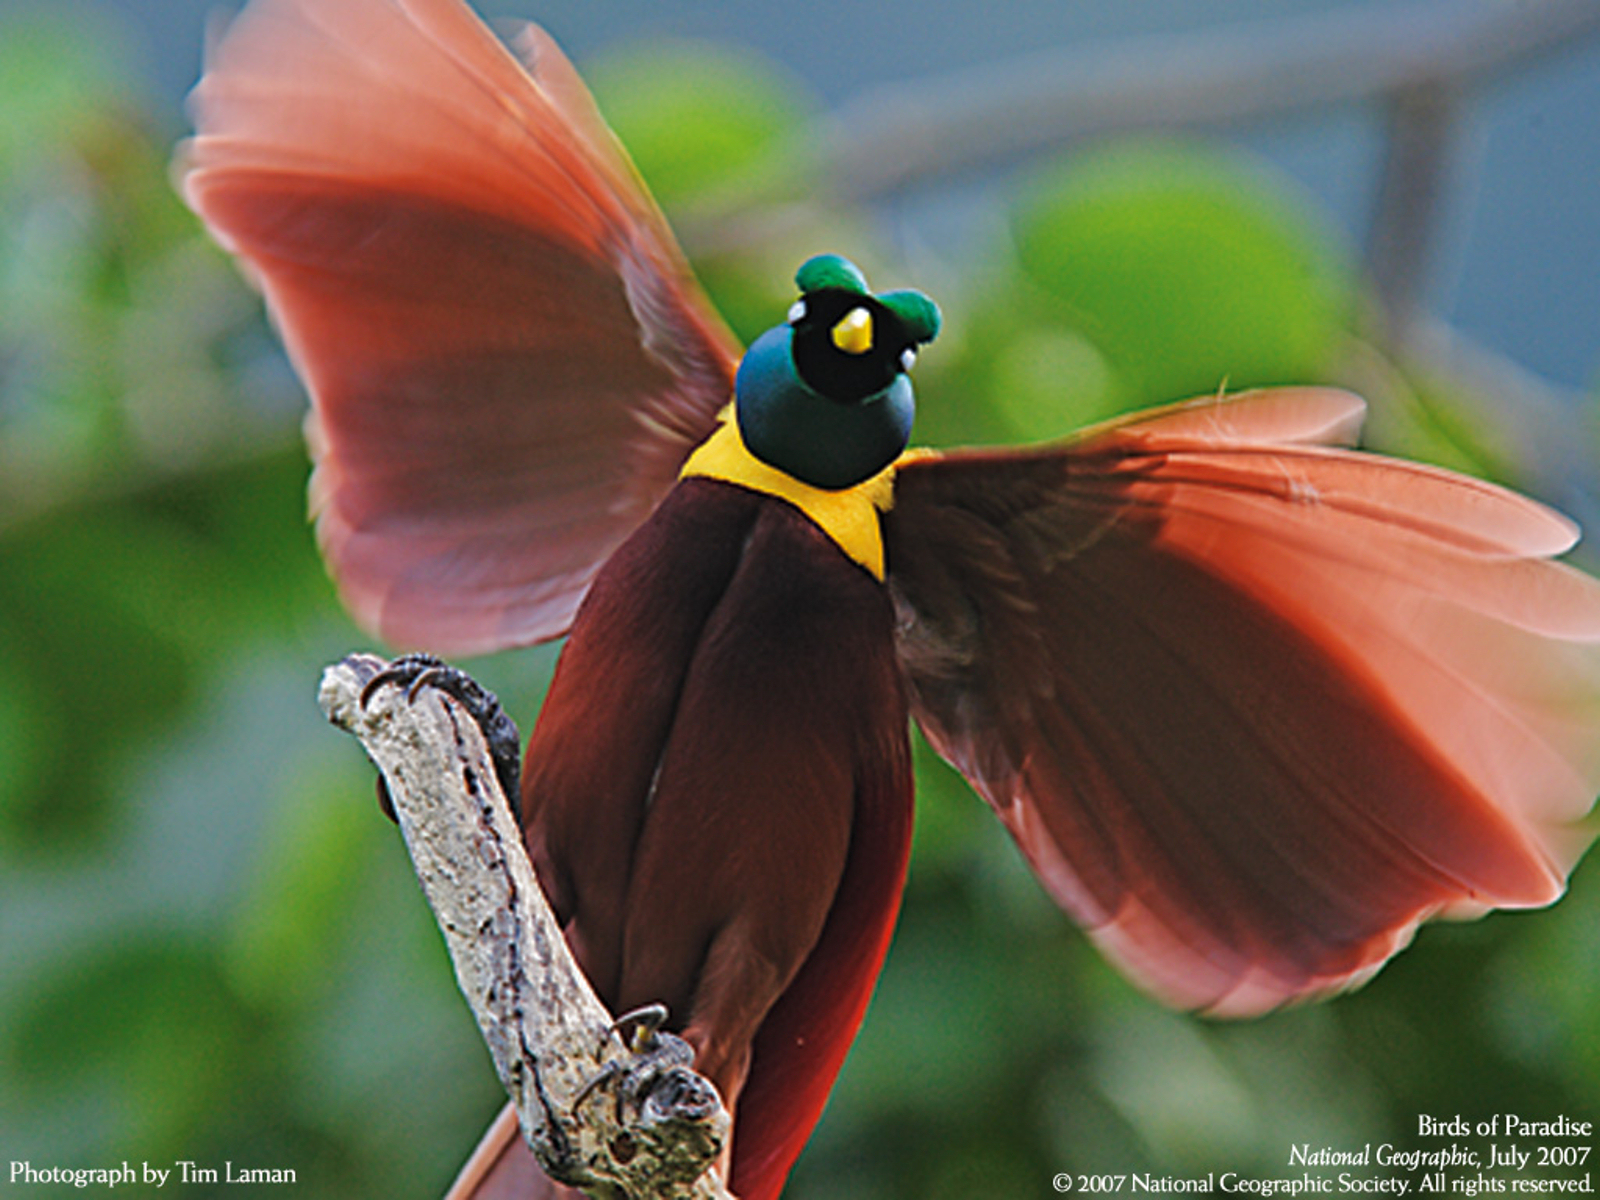 20 Charming Birds of Paradise Pictures